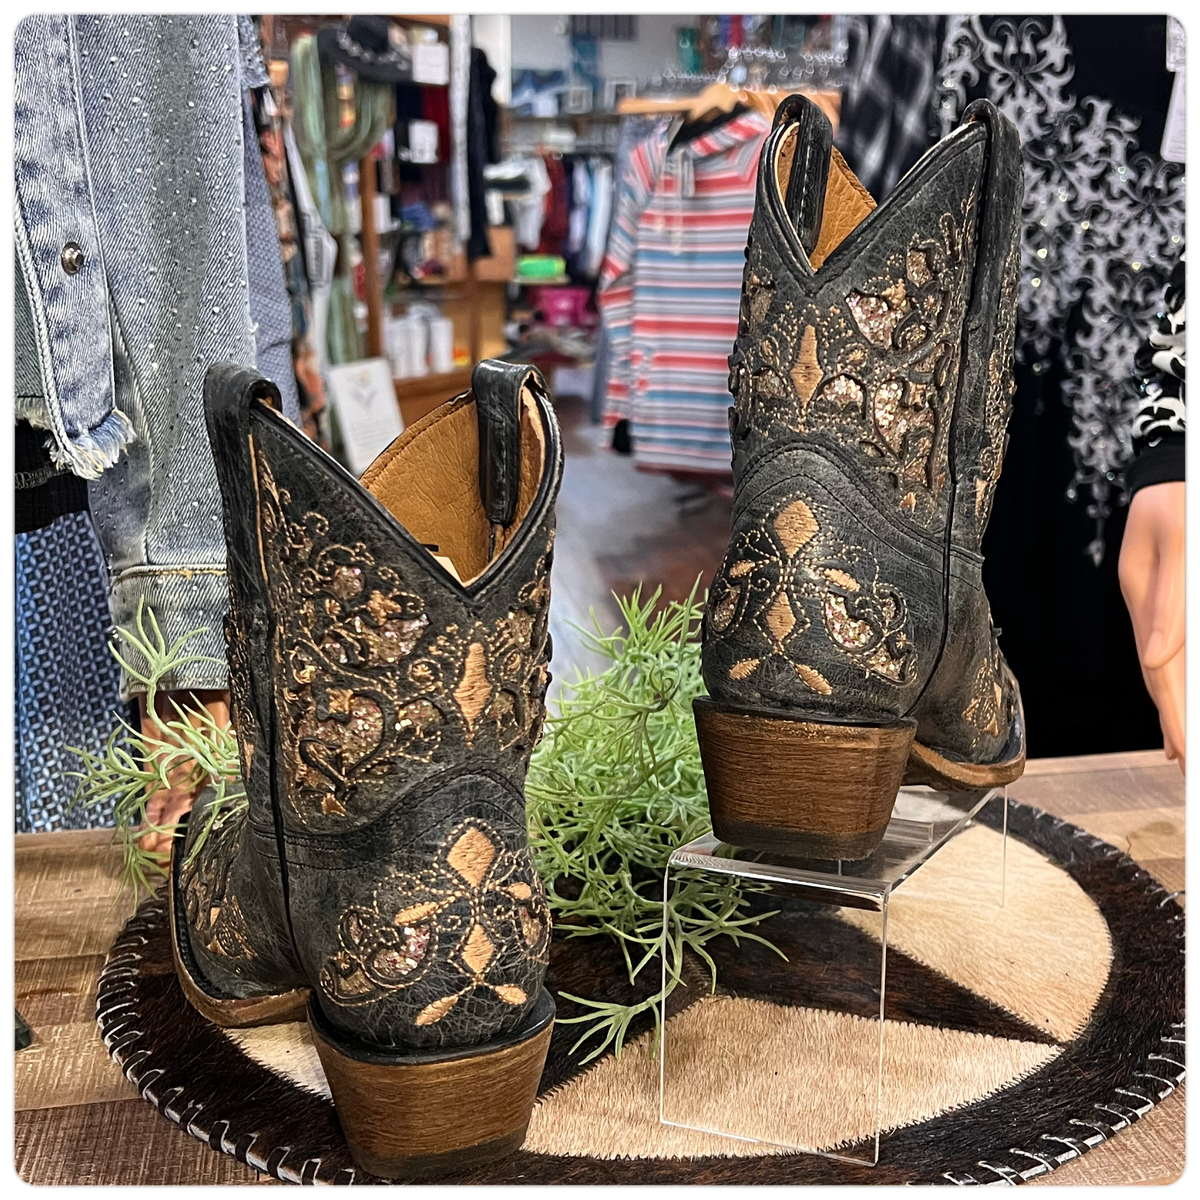 Corral Boots Teen Black Gold Shorty's-Ladies Boot-Corral Boots-Gallop 'n Glitz- Women's Western Wear Boutique, Located in Grants Pass, Oregon